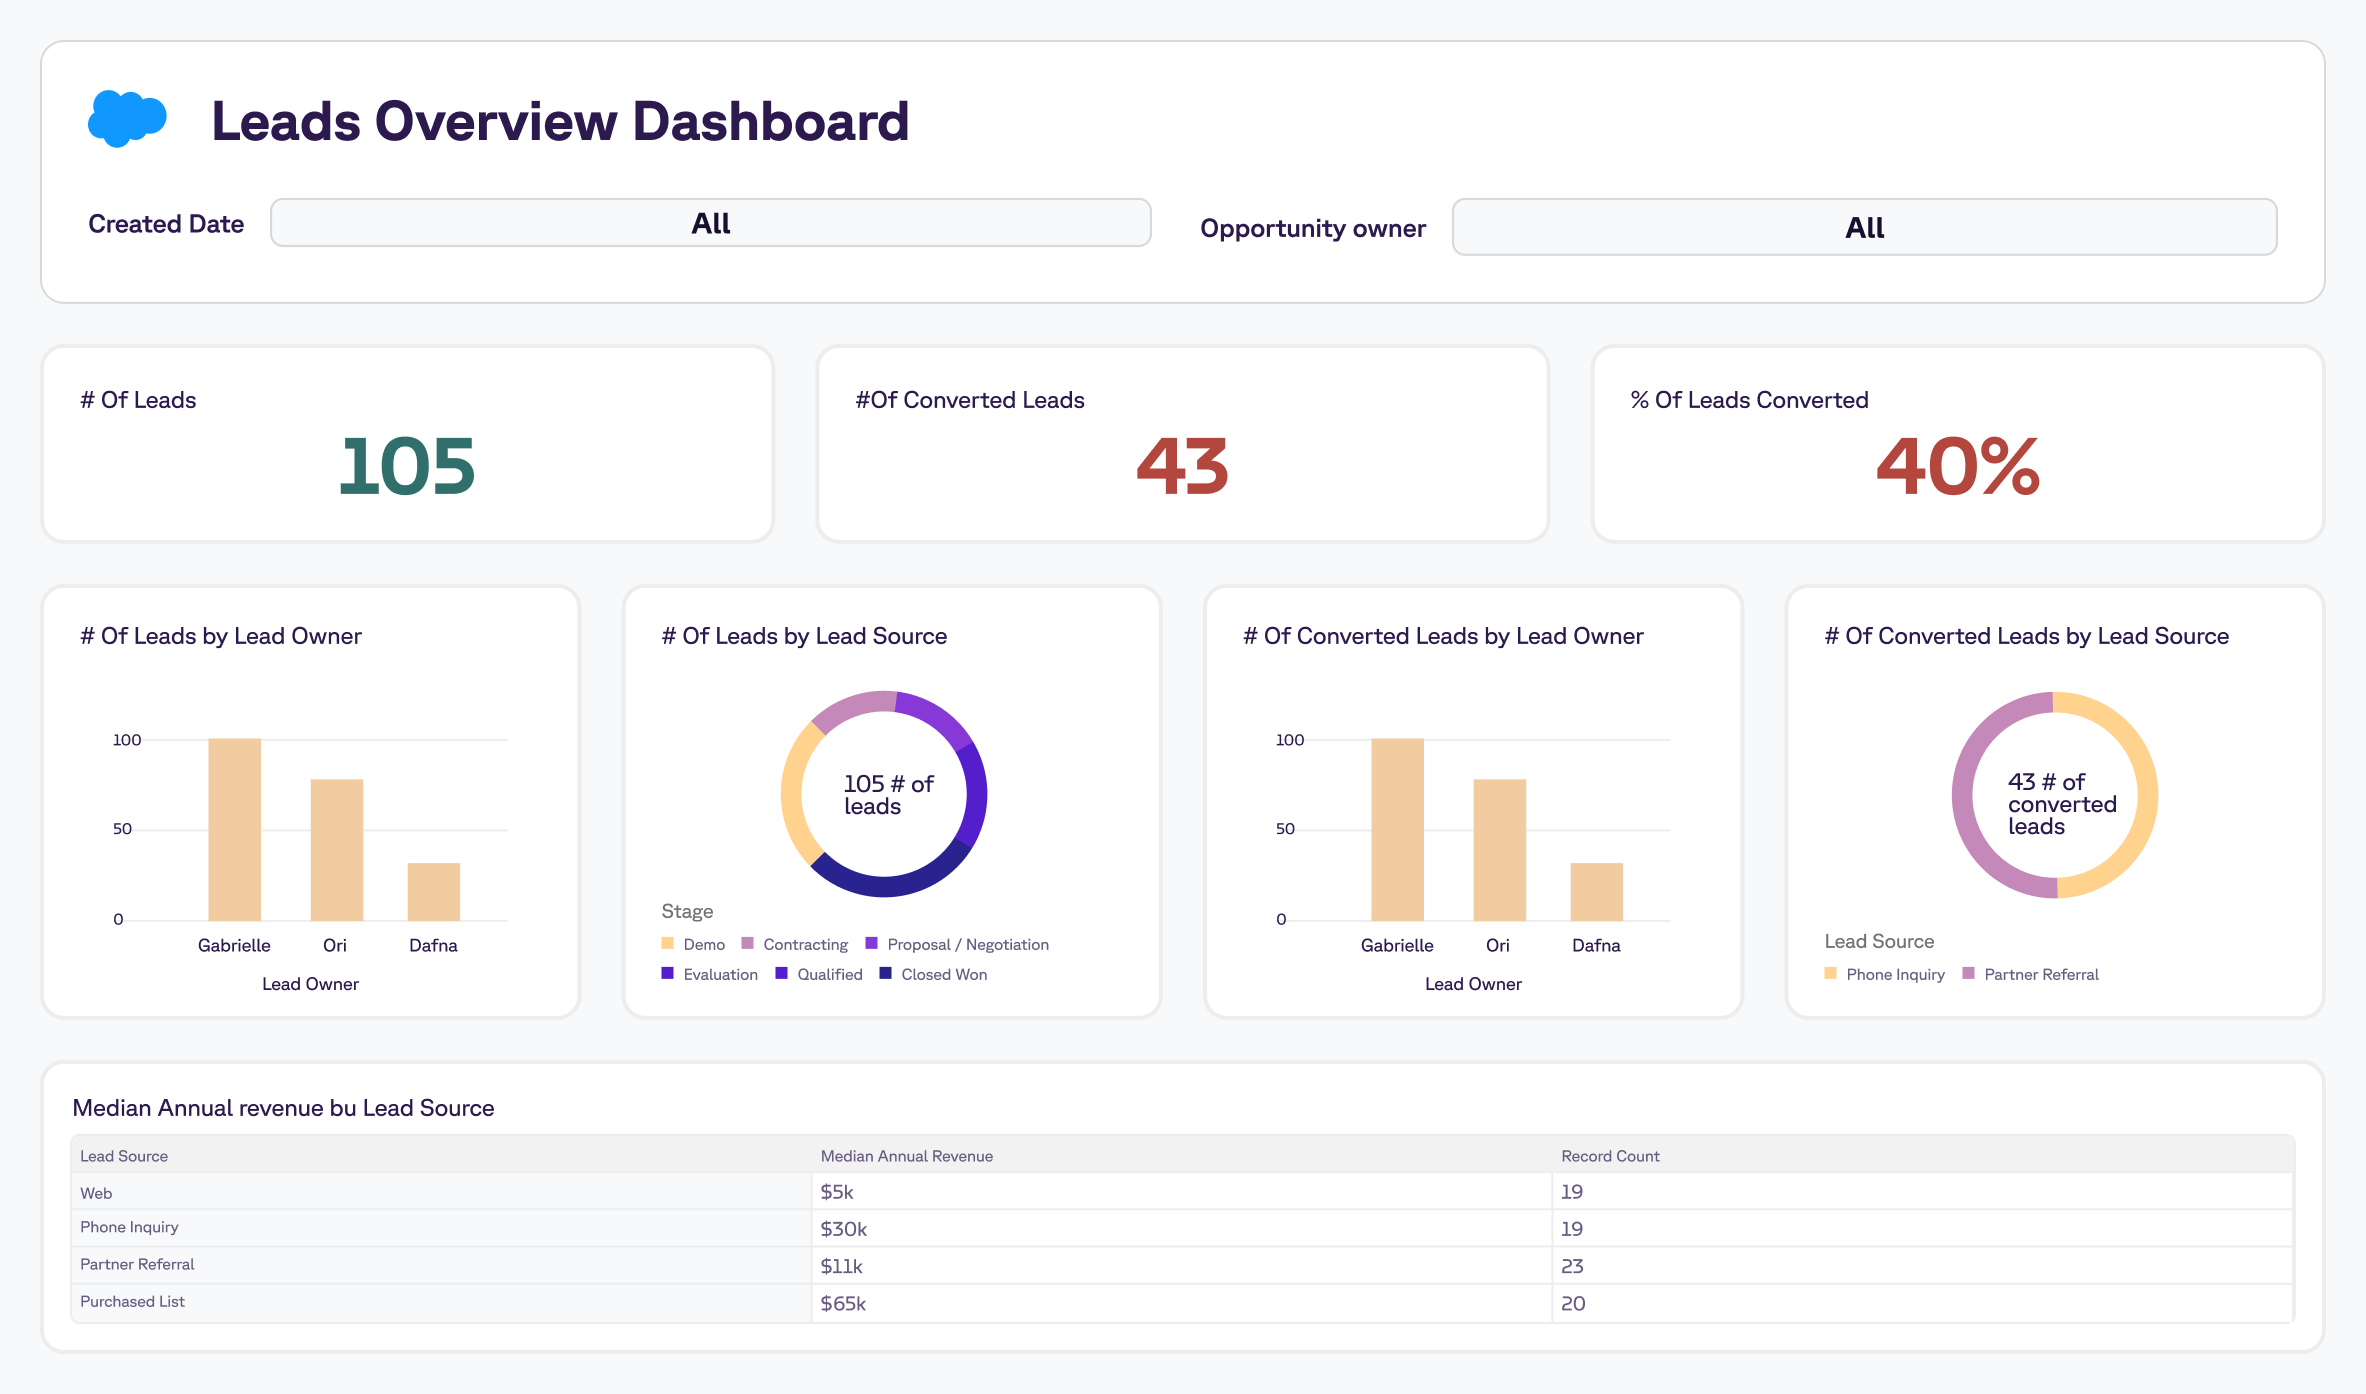 Leads Overview Dashboard